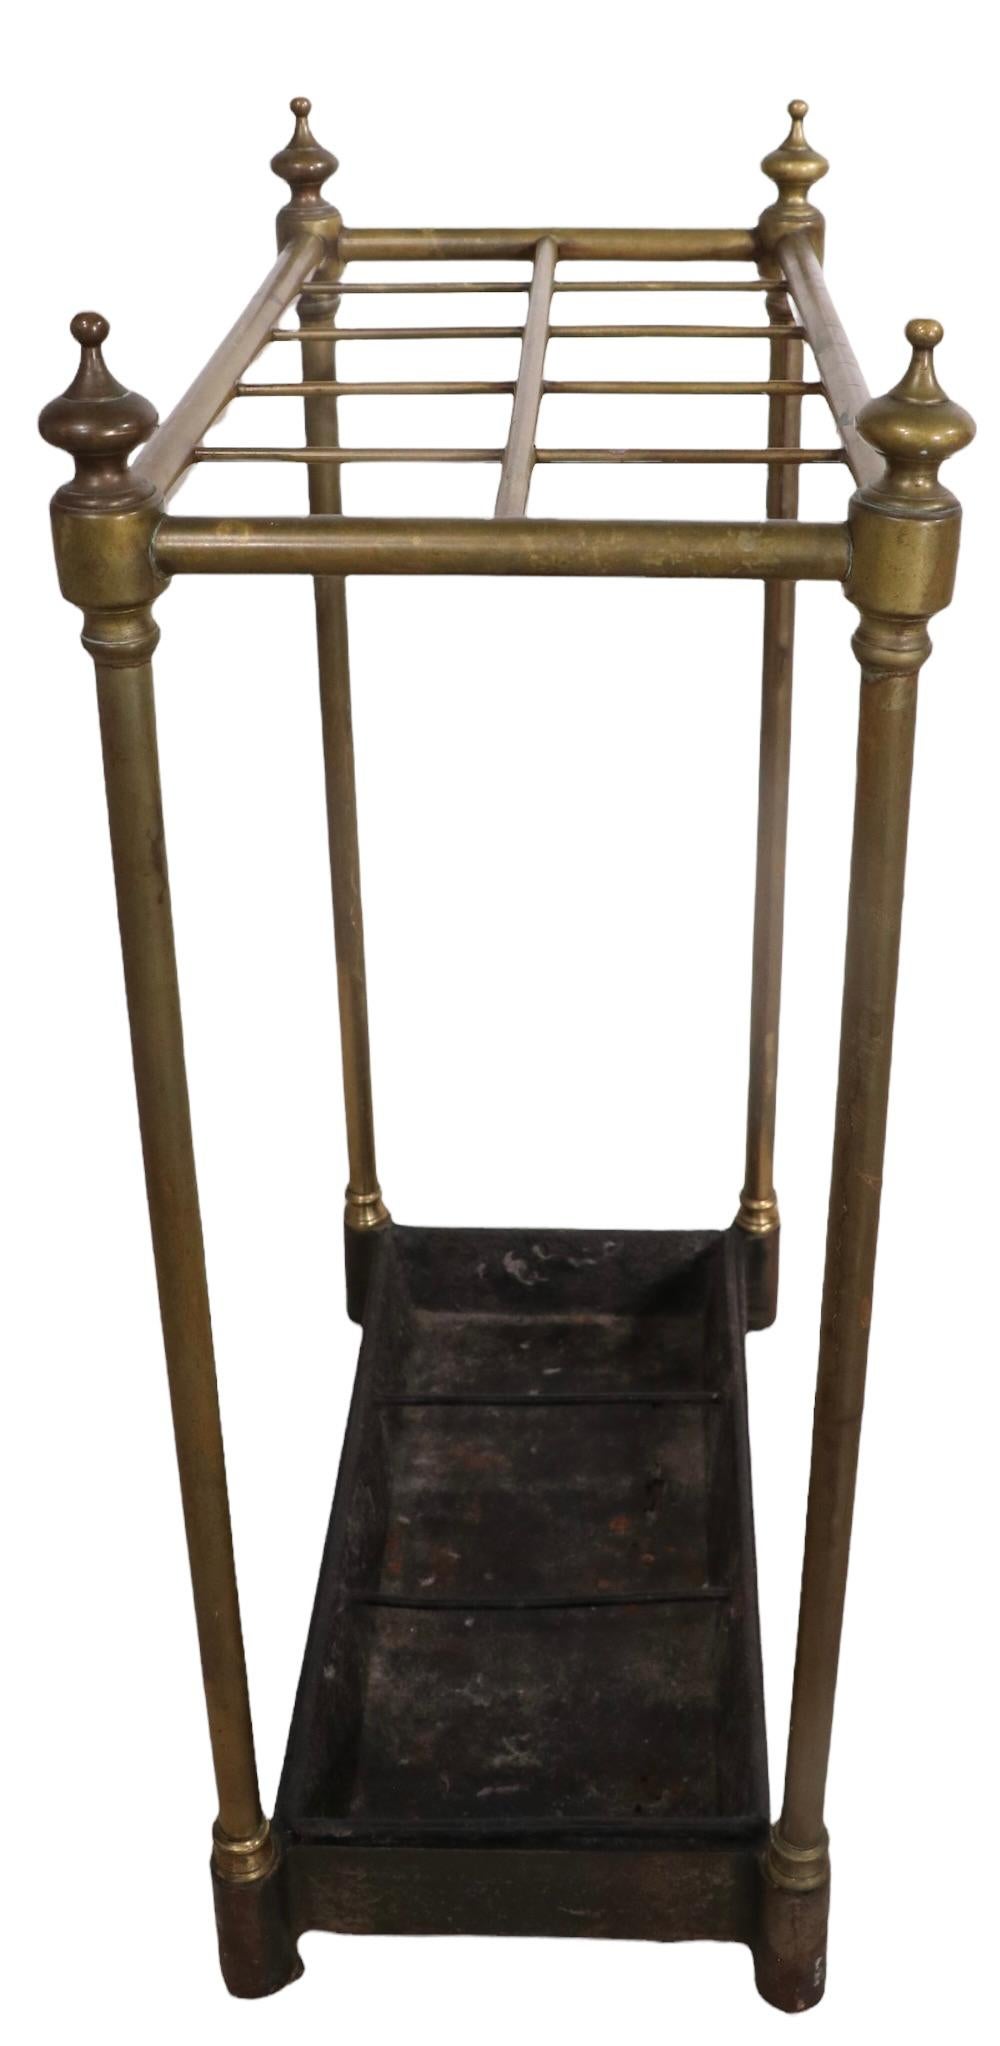 Victorian Architectural Brass and Iron Cane Umbrella Stand For Sale